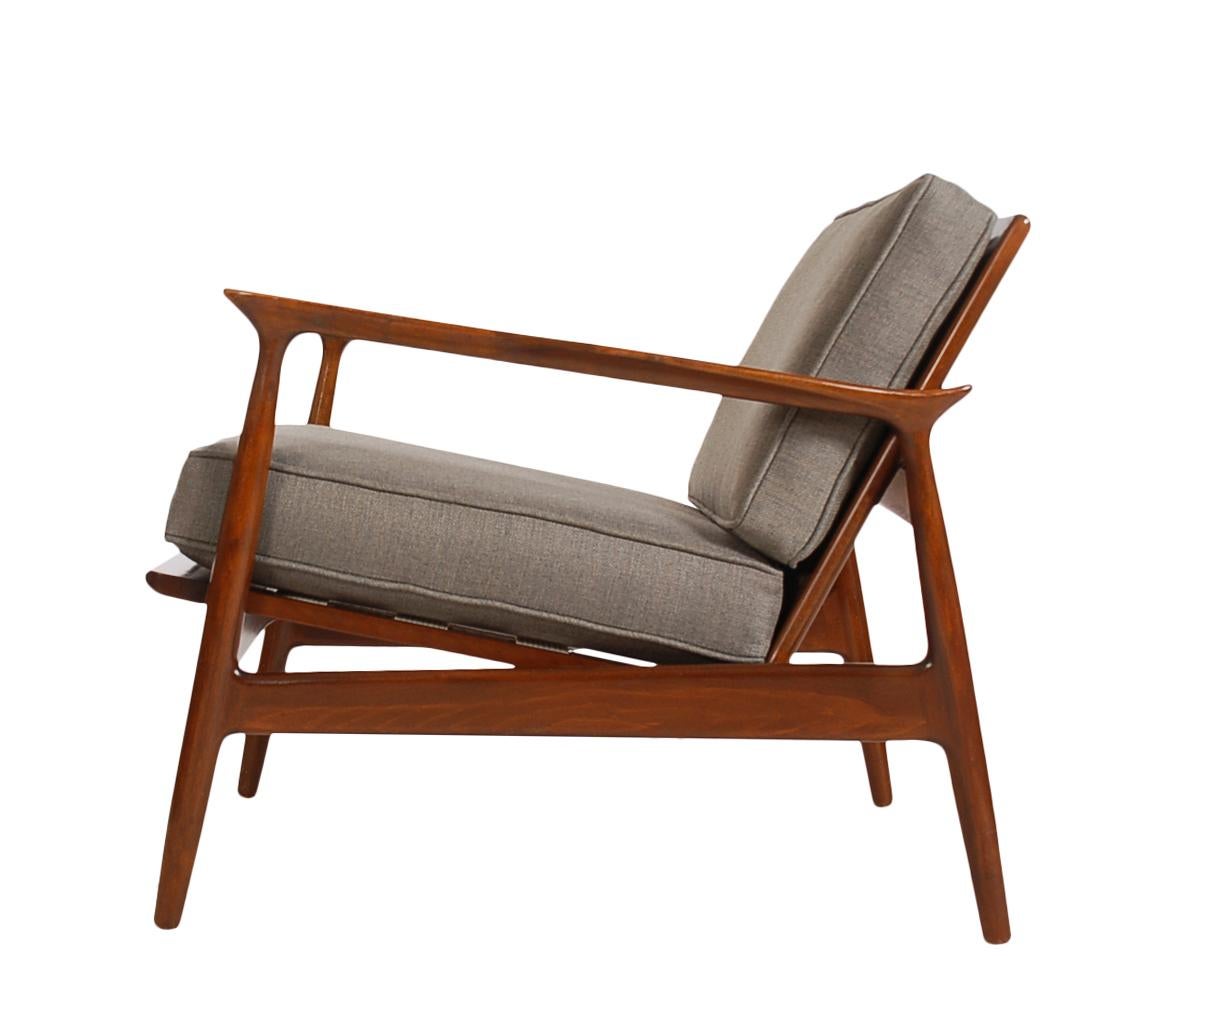 An early example IB Kofod Larsen's work; these lounge chairs have beautiful design lines from the 1950's. These feature solid walnut frames, raffia backs, new upholstery, and new seat webbing. Stamped made in Denmark.